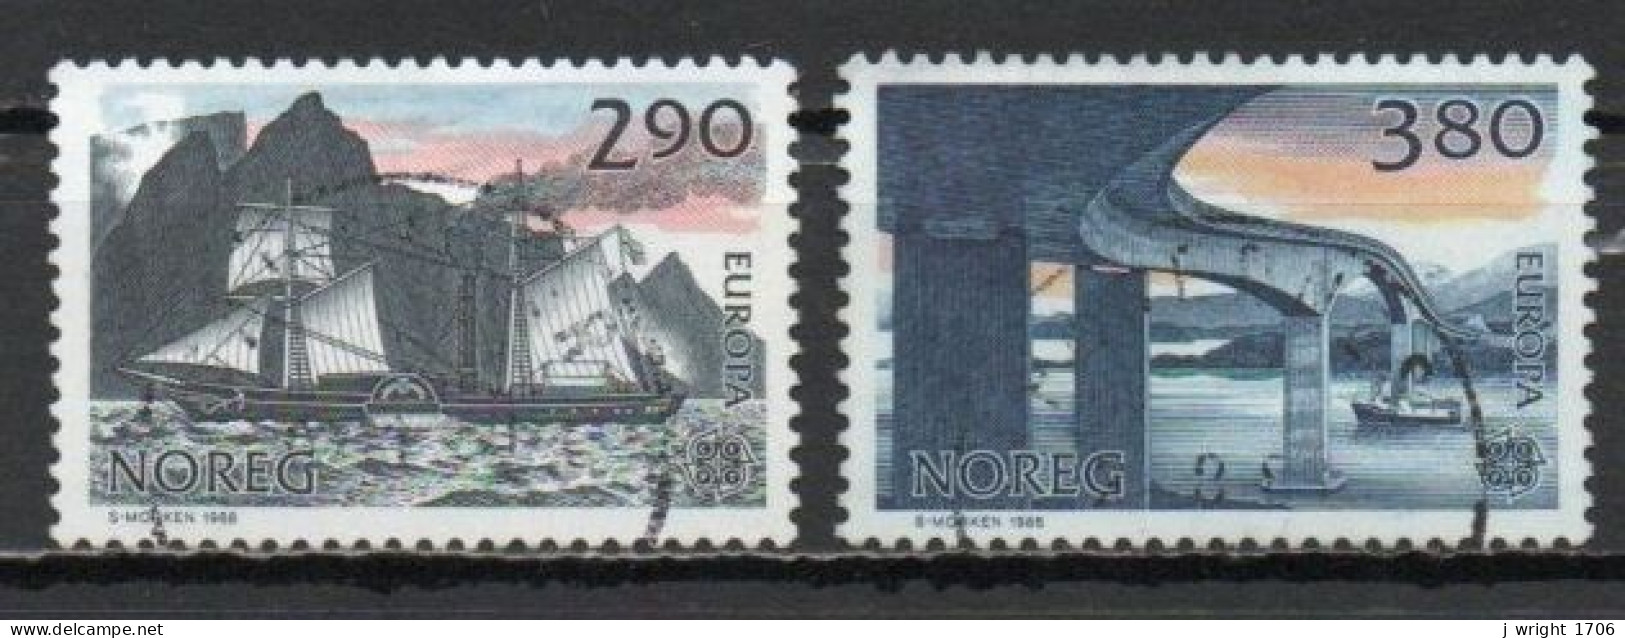 Norway, 1988, Europa CEPT, Set, USED - Used Stamps